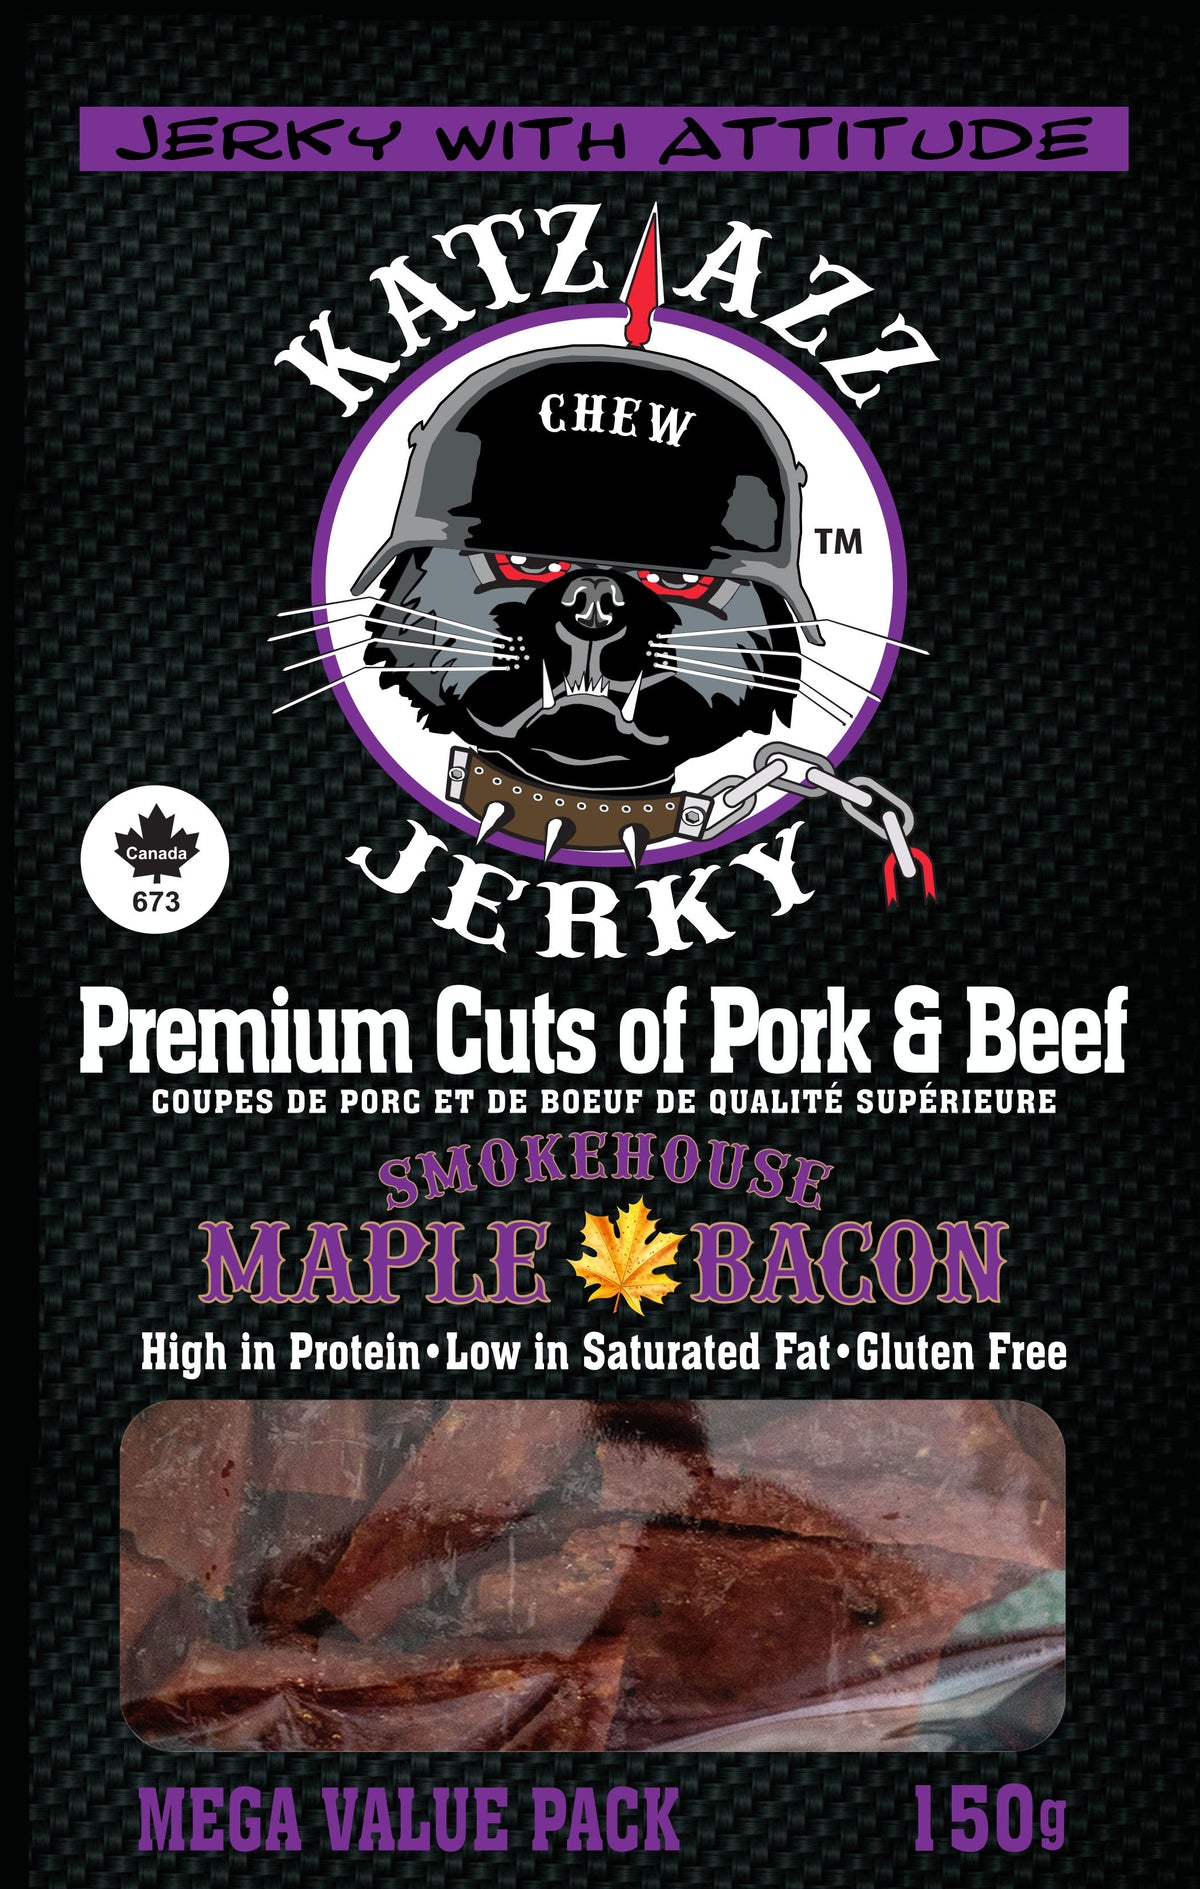 SOLD OUT Smokehouse Maple Bacon 150g x CASE of 8